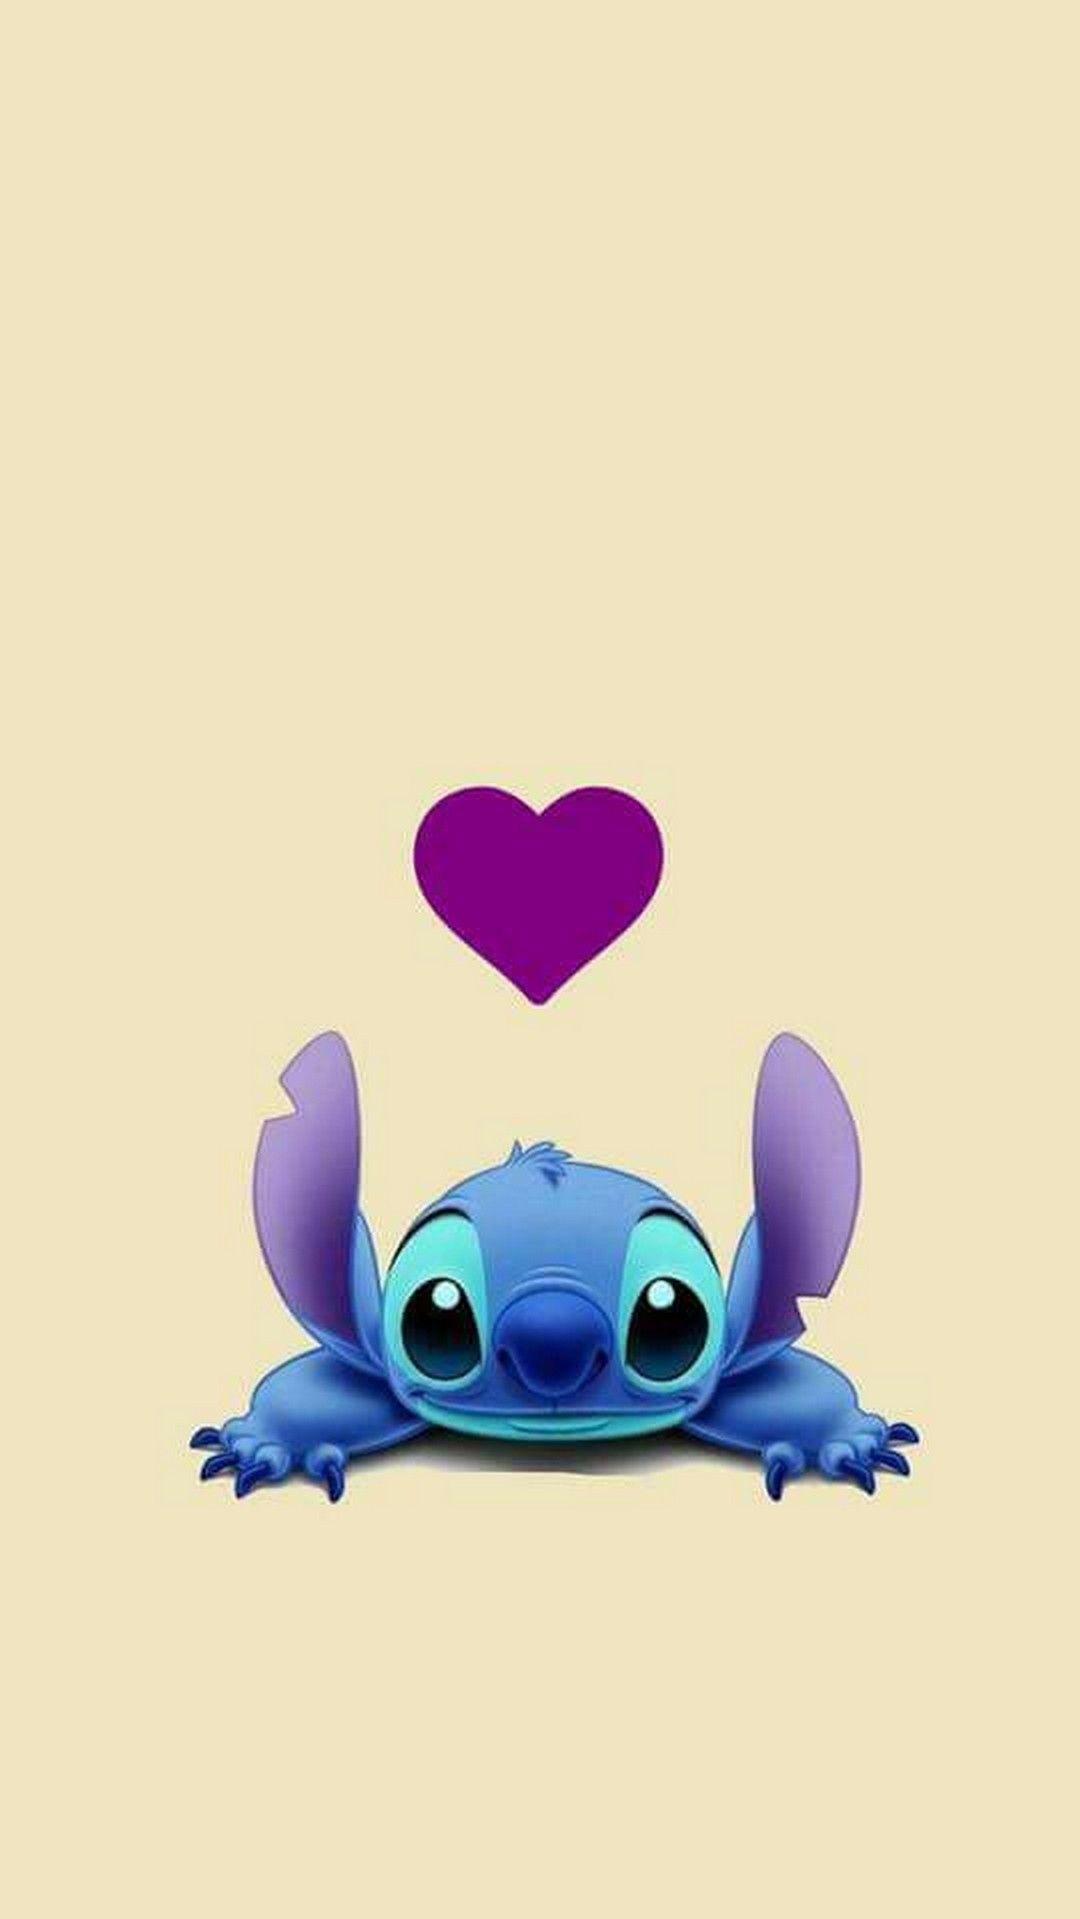 Stitch iPhone Wallpaper HD Is Best High Definition Image